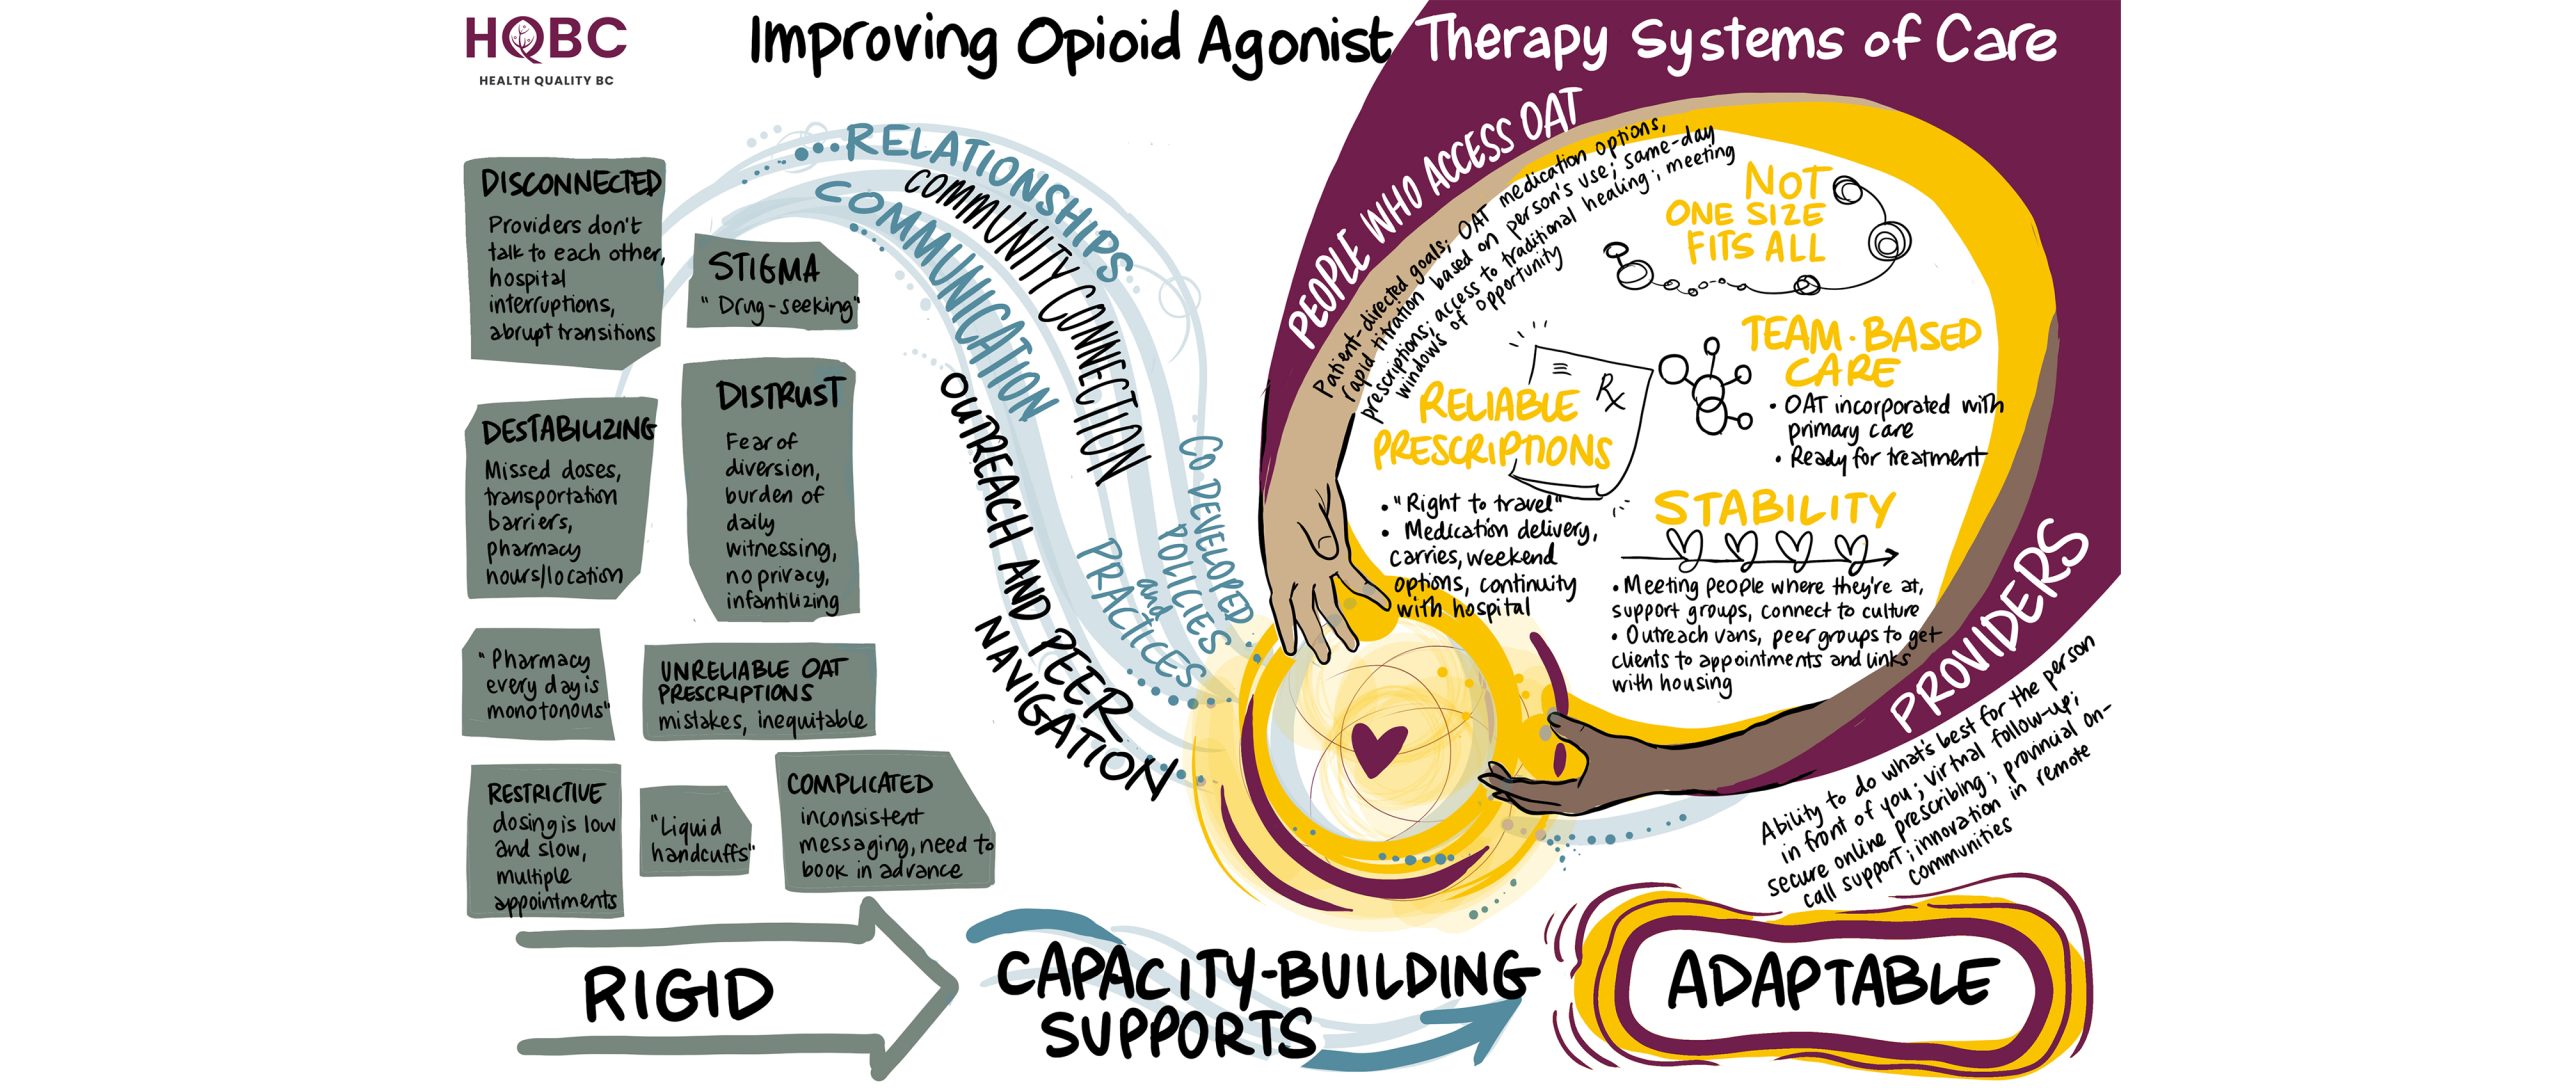 illustrated journey map about accessing and delivering opioid agonist treatment (OAT) in BC, health system perspectives, illustrated by drawing change sam bradd Health Quality BC